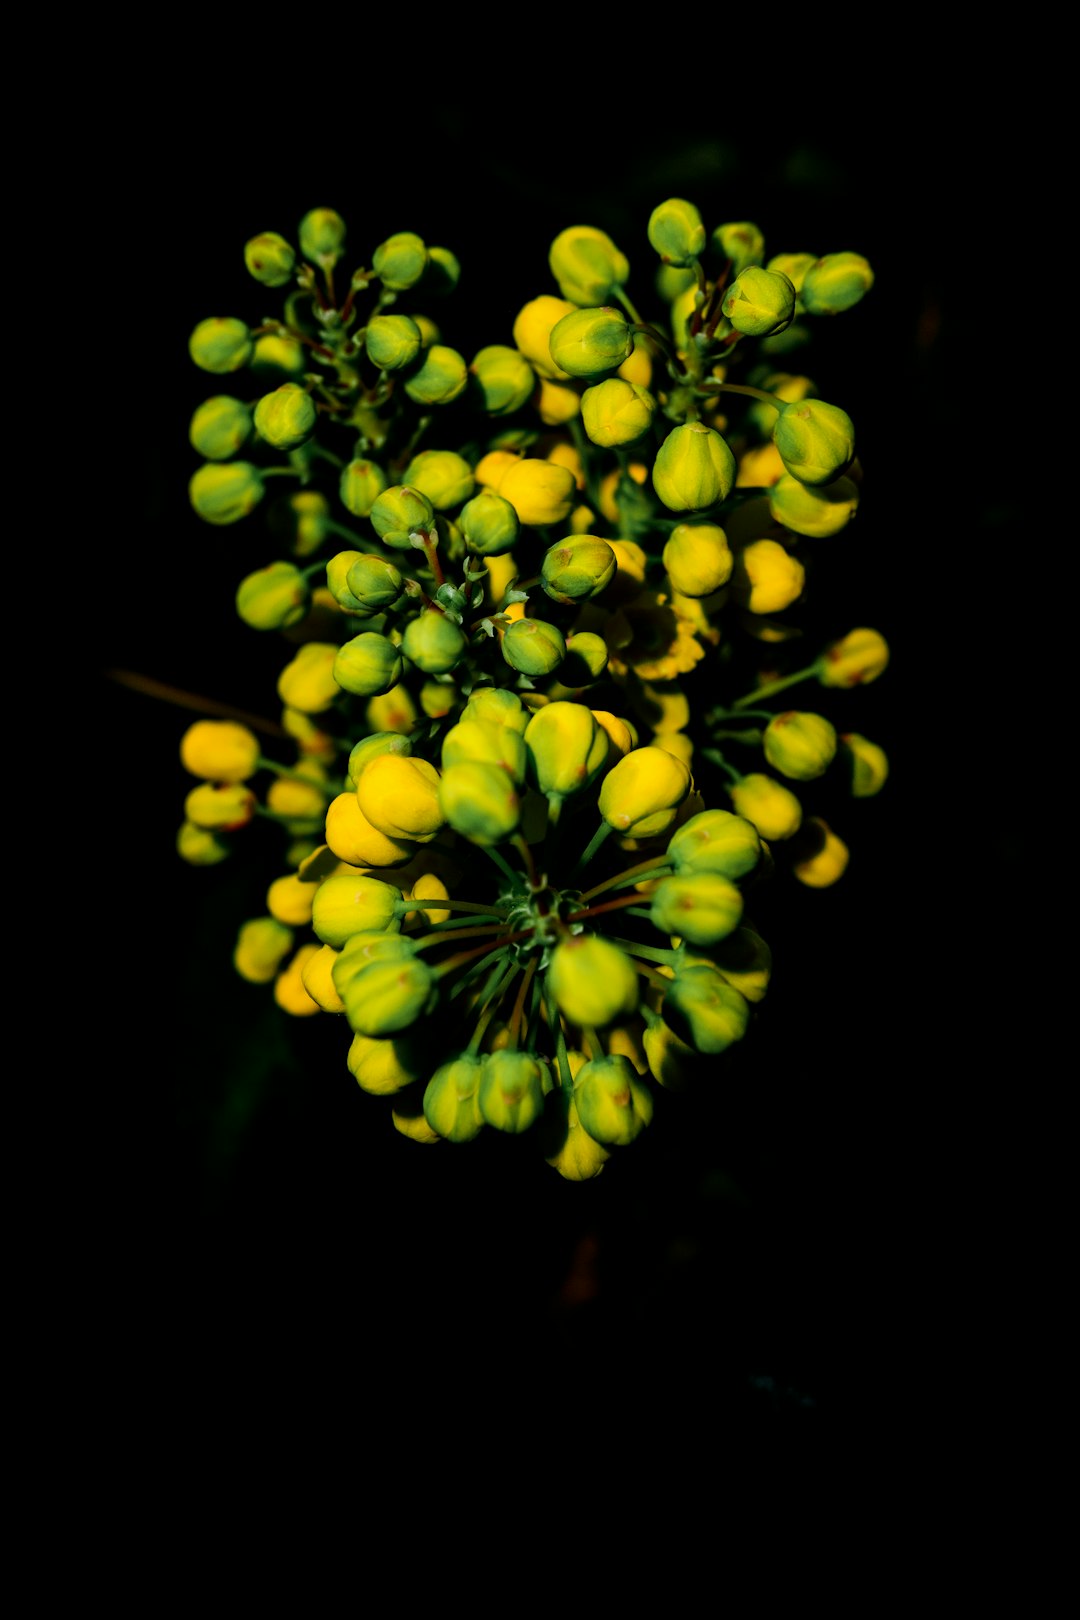 yellow round fruits in close up photography